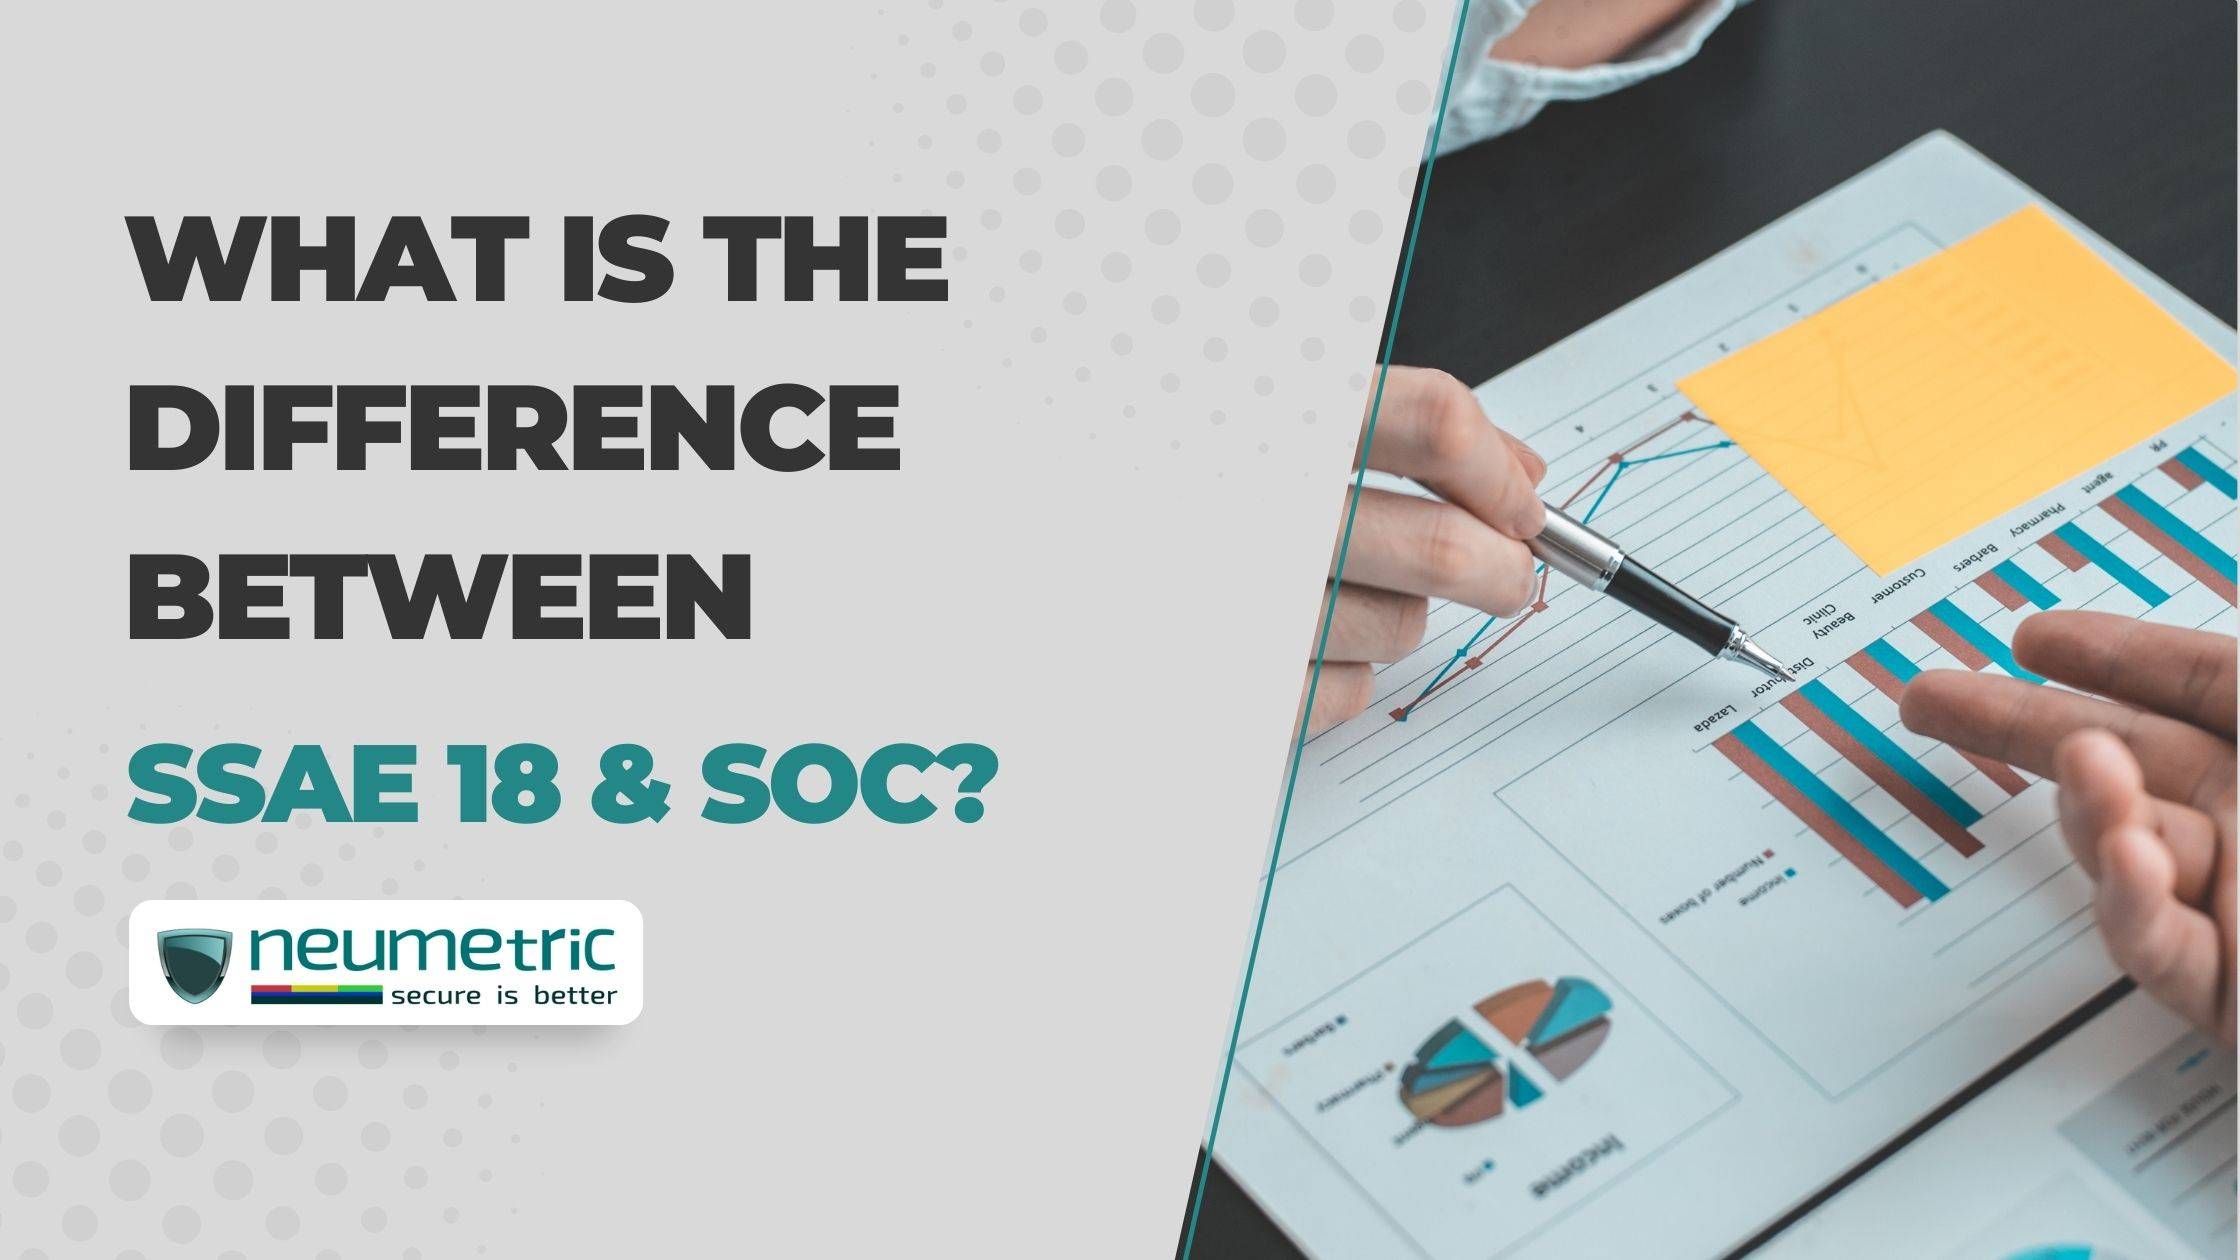 What is the difference between SSAE 18 & SOC?